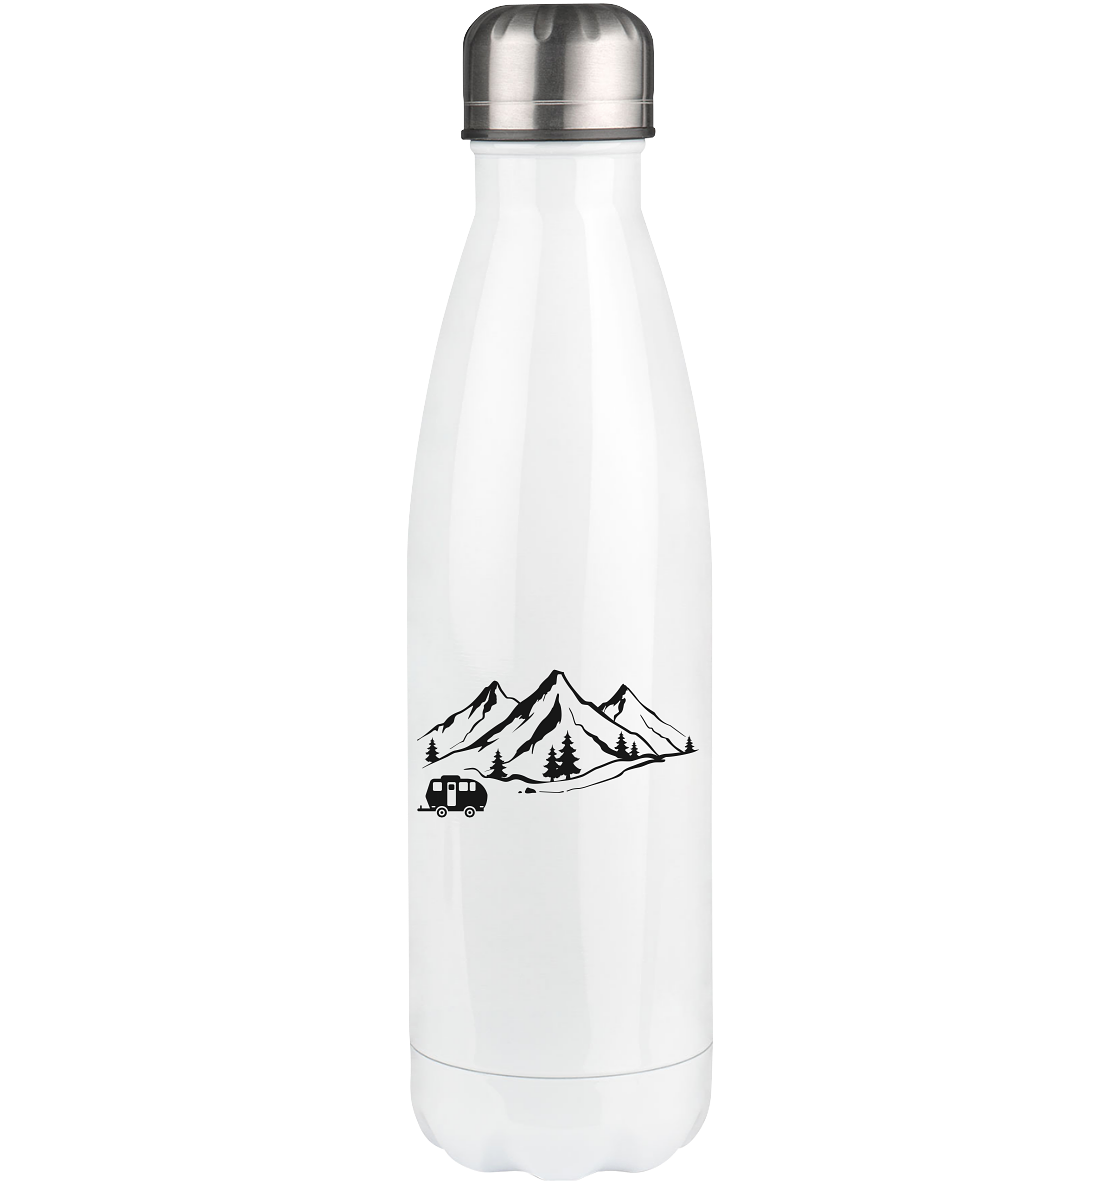 Mountain 1 and Camping - Edelstahl Thermosflasche camping UONP 500ml